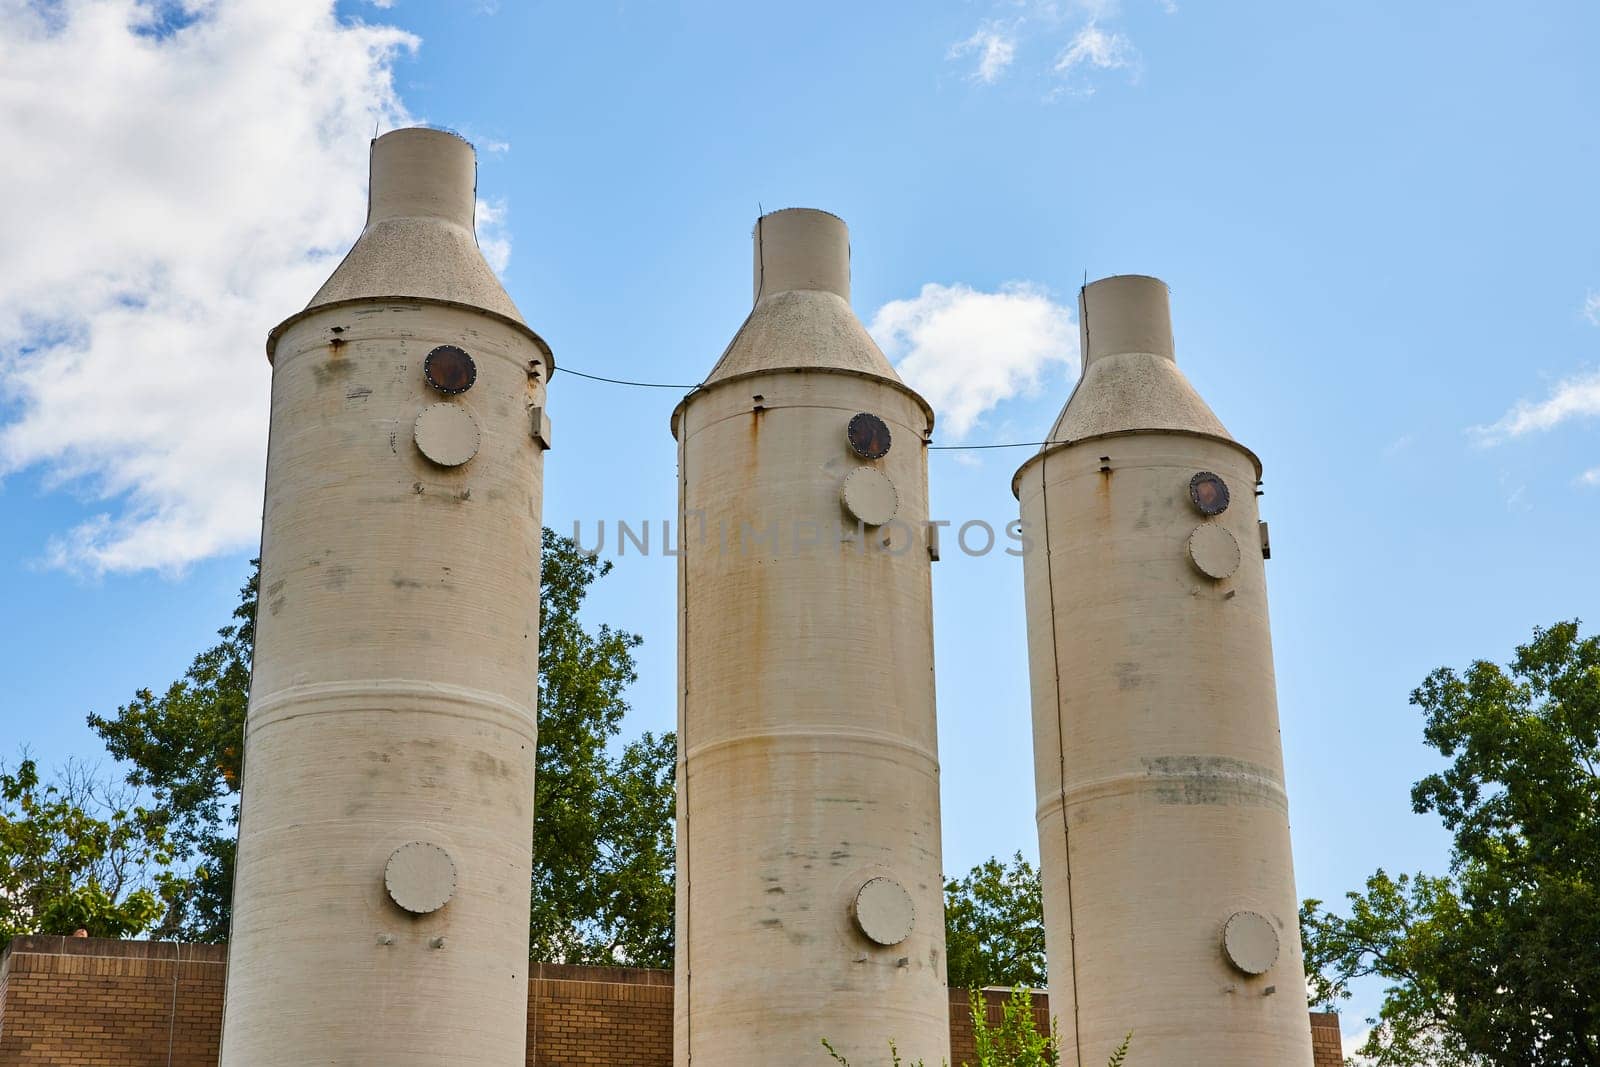 Industrial Silos Against Blue Sky with Scattered Clouds, Ground-Level View by njproductions